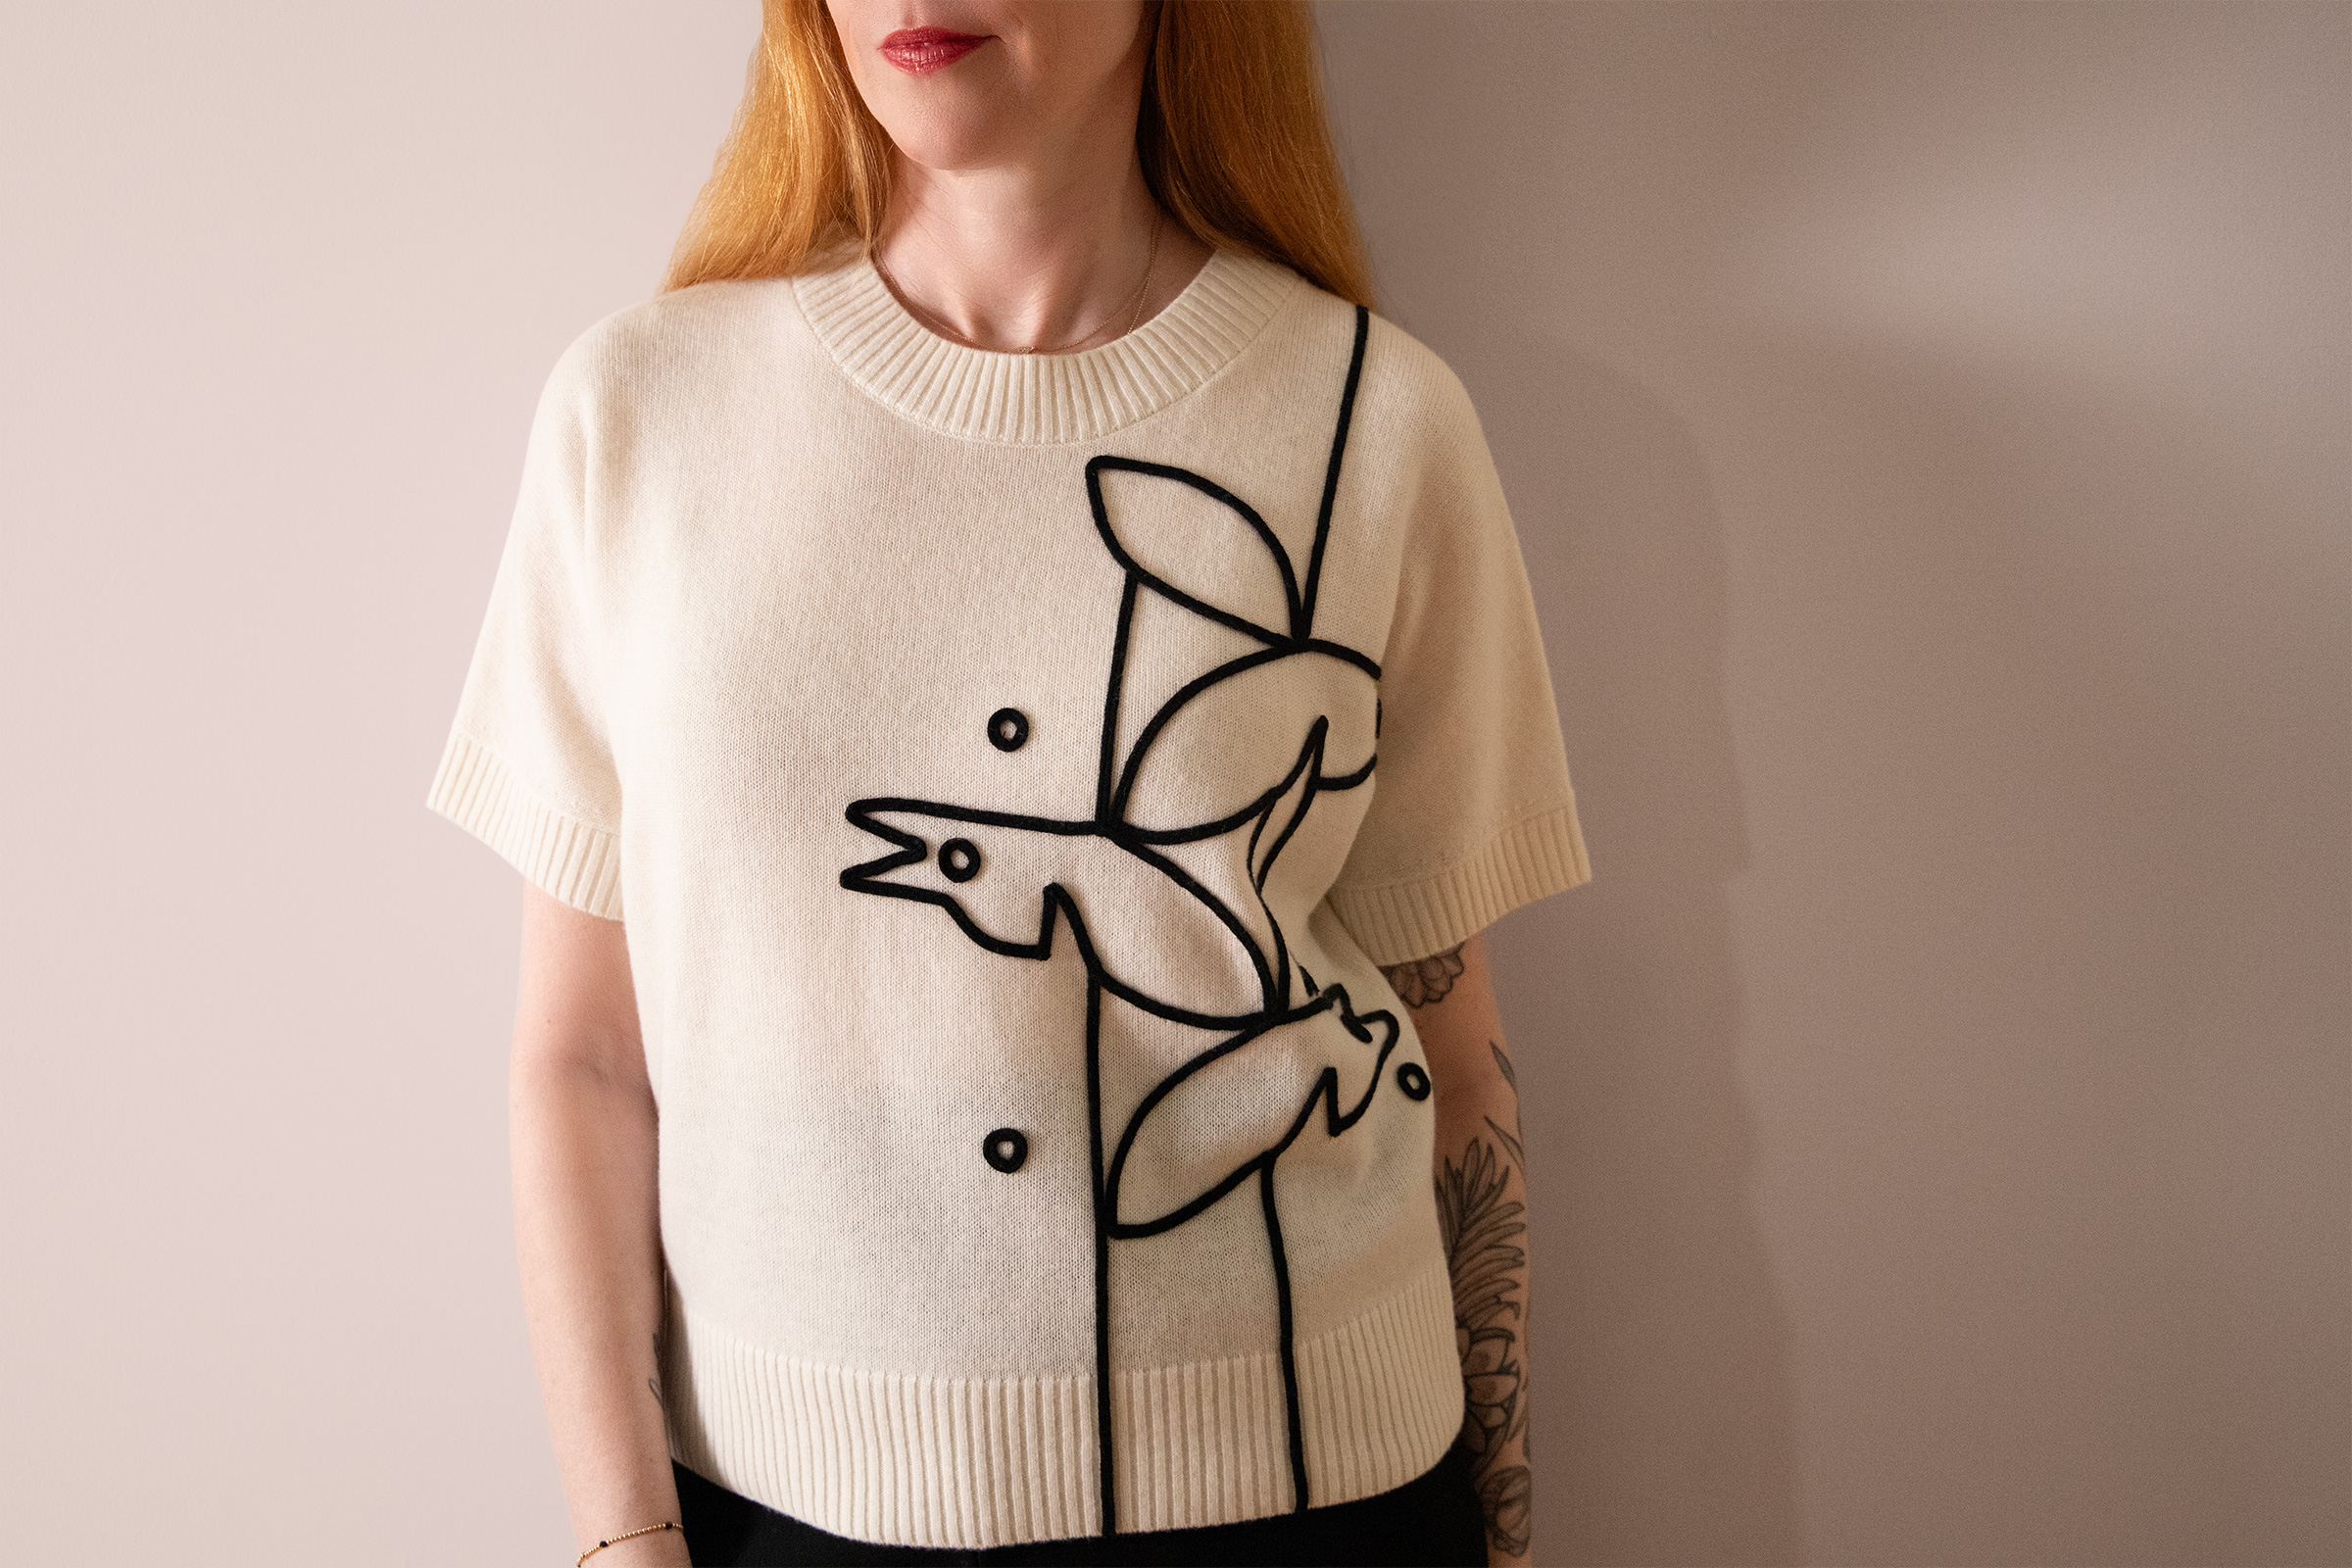 red haired woman wearing a cream cashmere sweater with black crows applique design